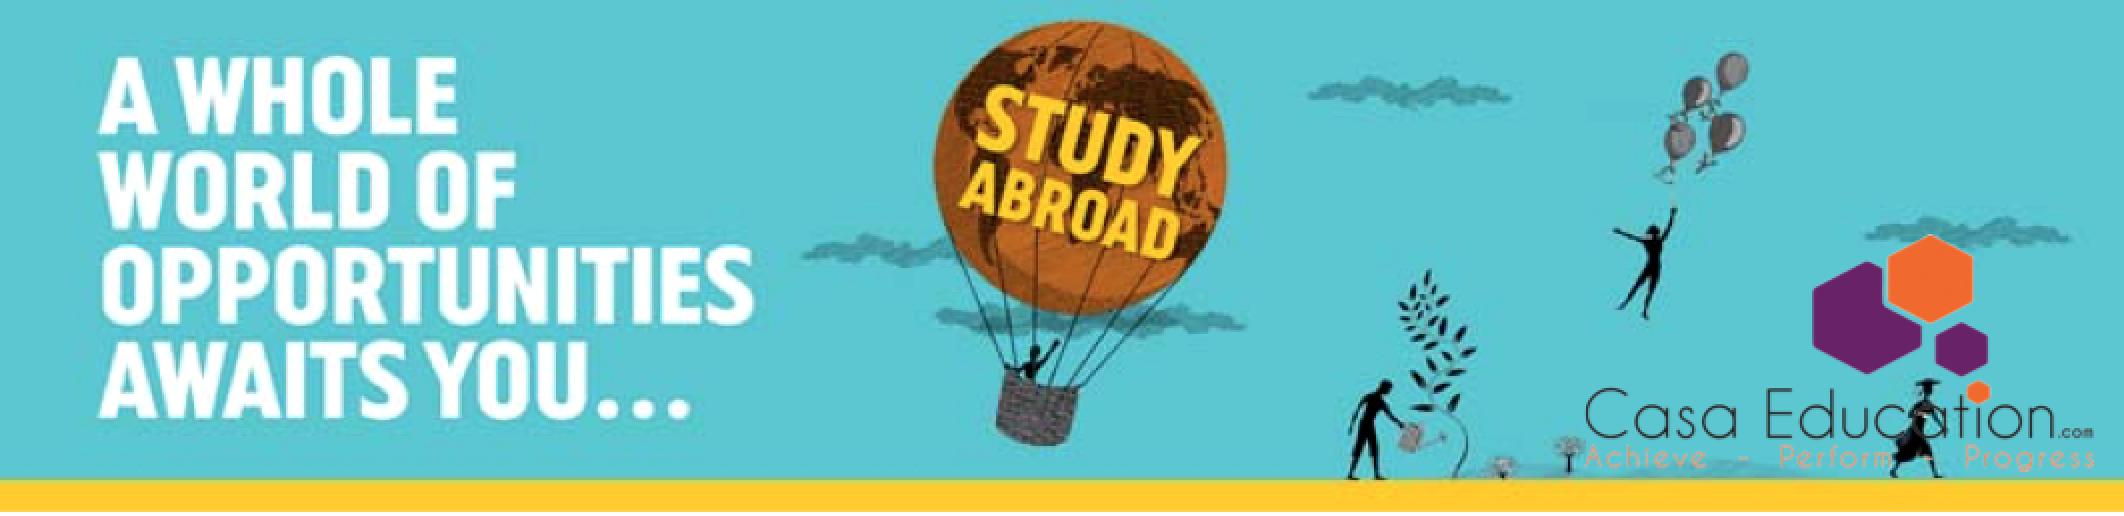 banner study abroad CasaEducation